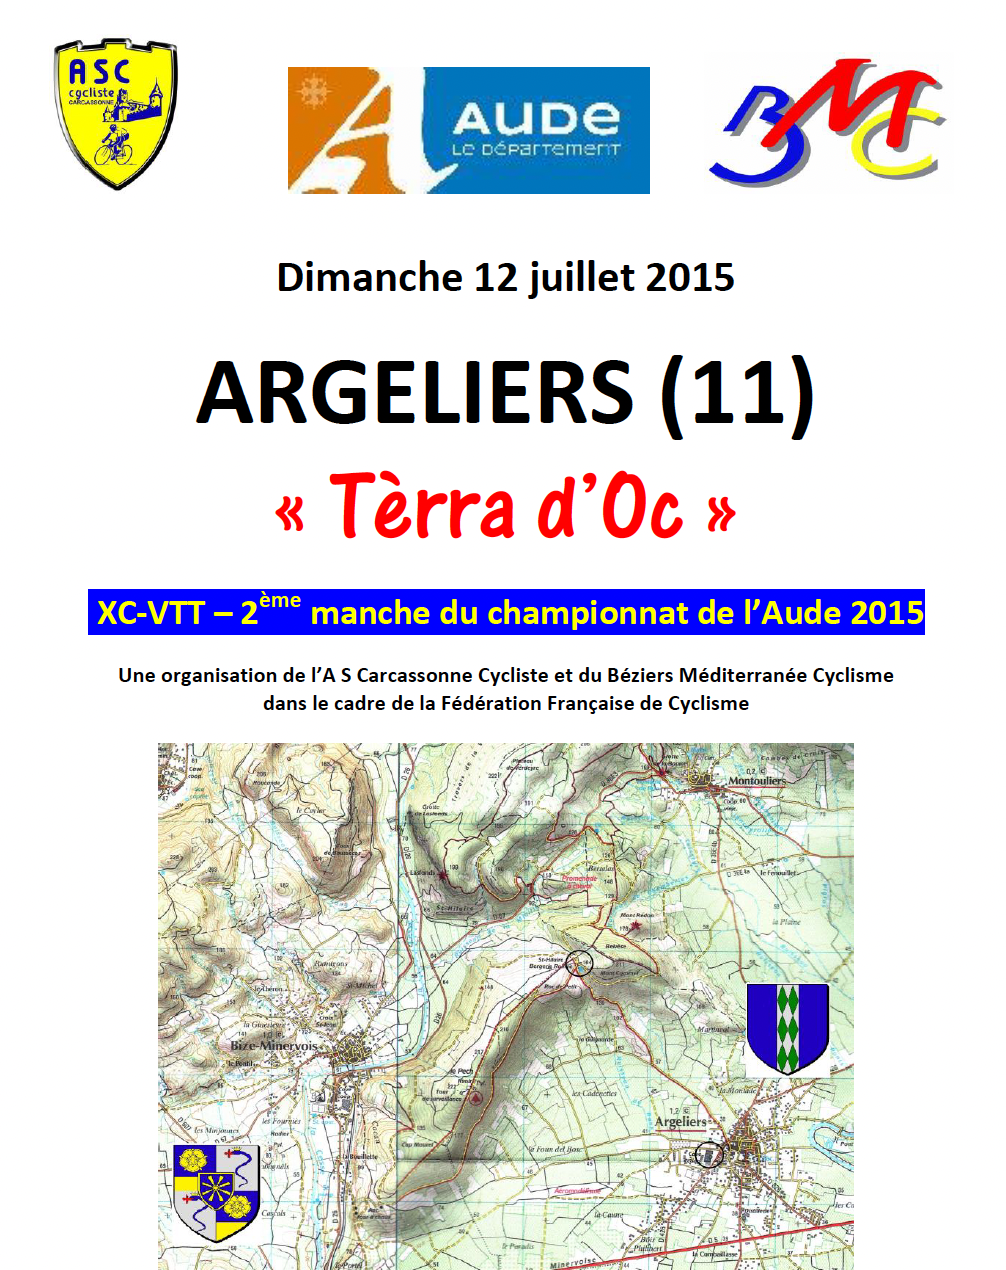 Argeliers2015.png